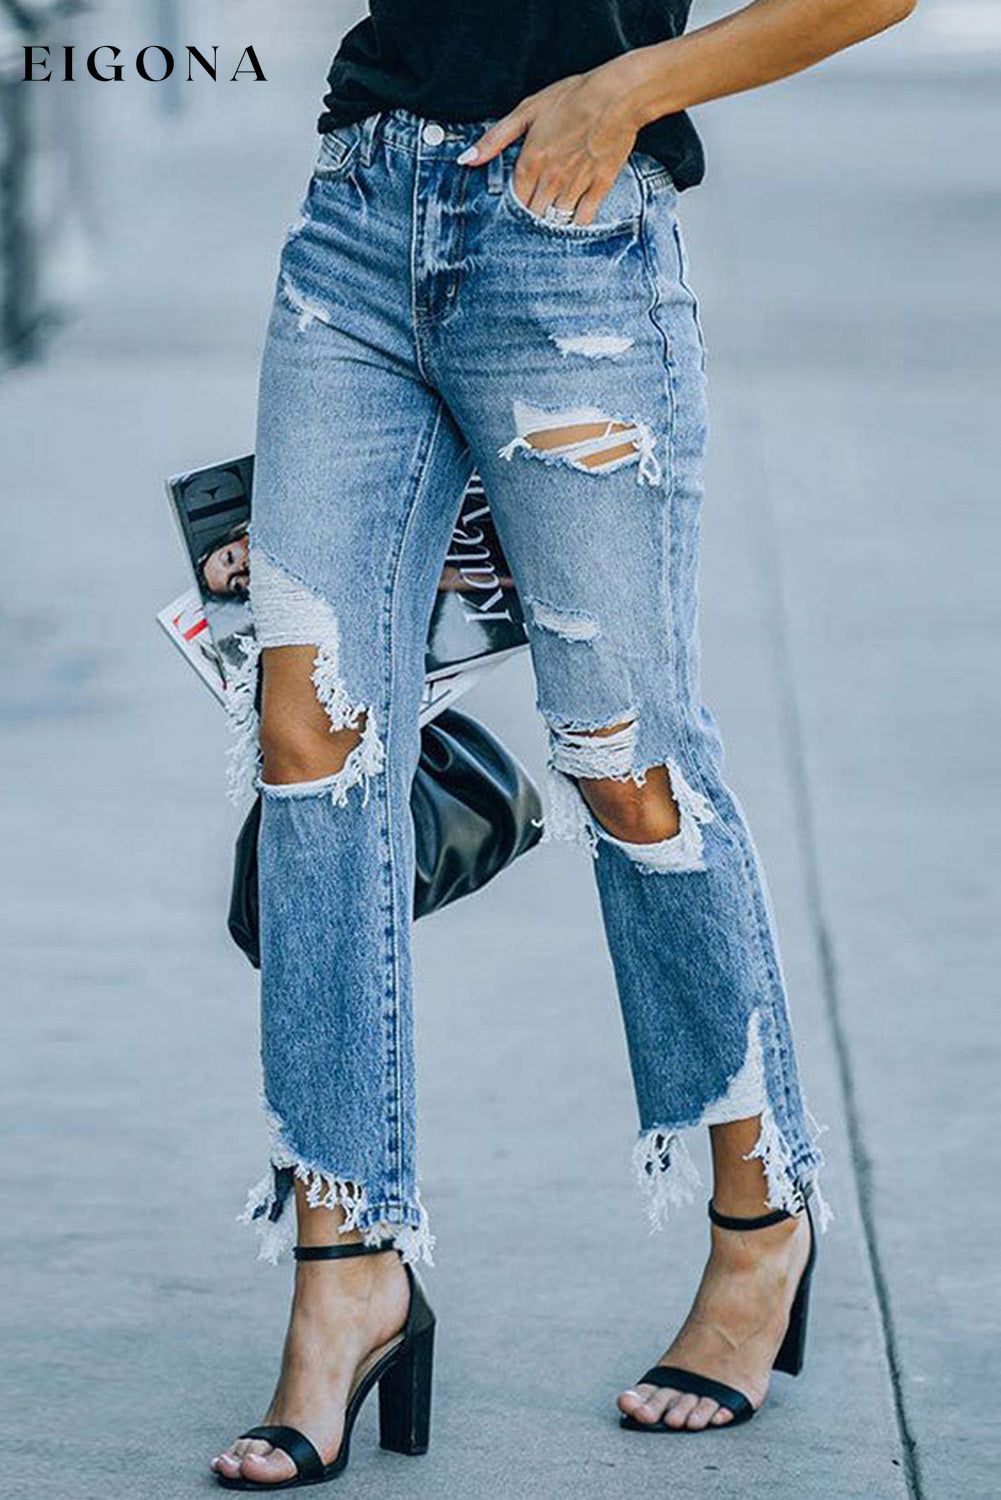 Sky Blue Ripped Knee Hole High Waist Jeans All In Stock Best Sellers bottoms clothes Craft Distressed Early Fall Collection Fabric Denim Hot picks jeans Occasion Daily pants ripped knee Season Spring Style Casual